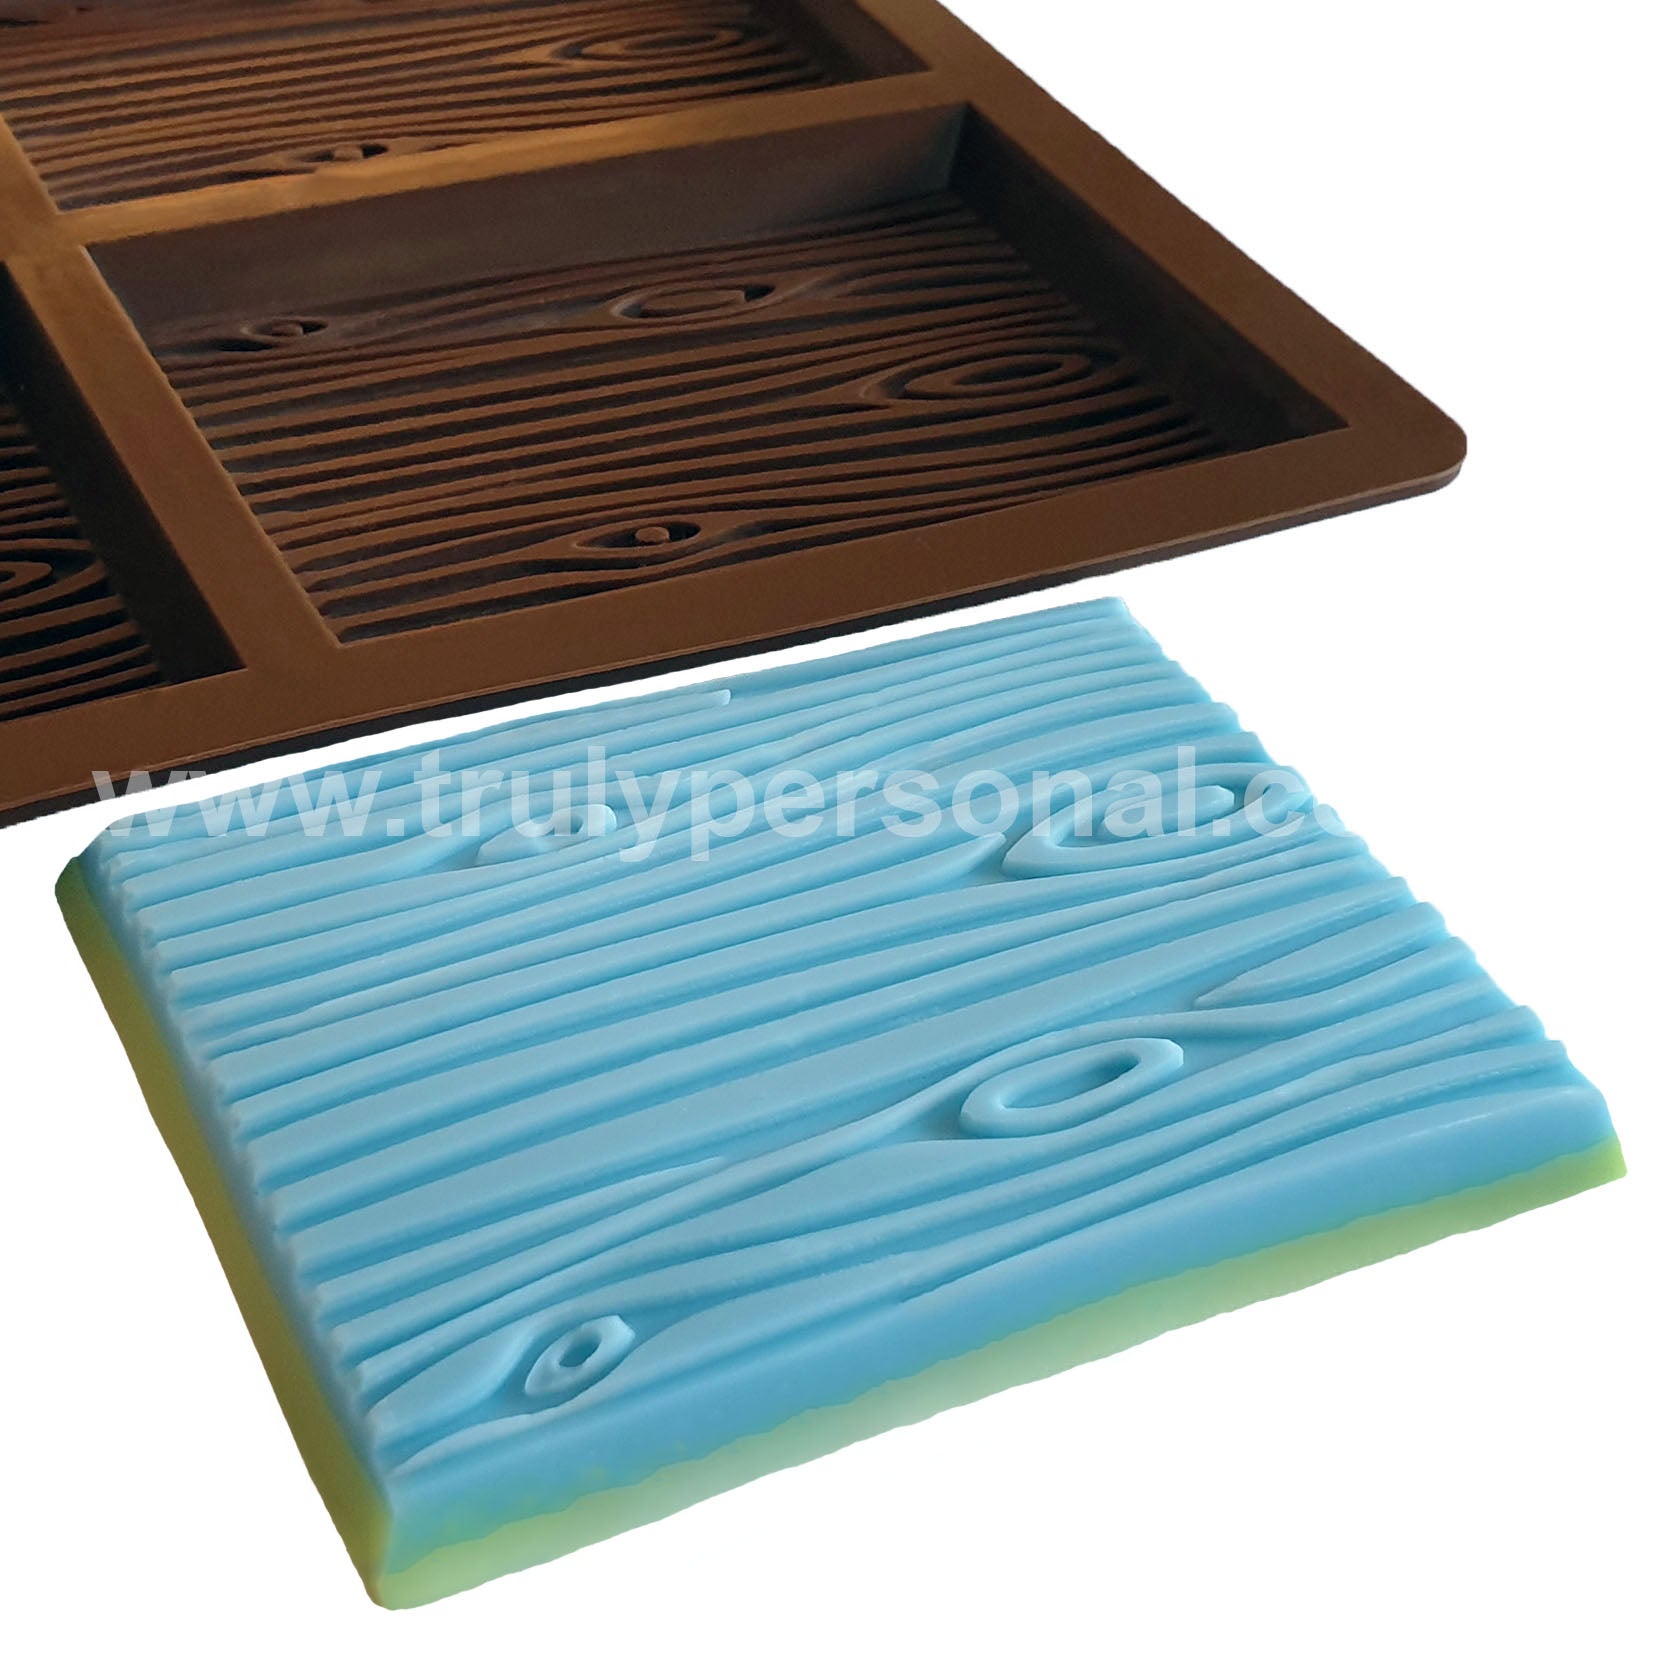 Wood Grain Bar Silicone Mould - 4 Cell | Wax Melts | Truly Personal Ltd